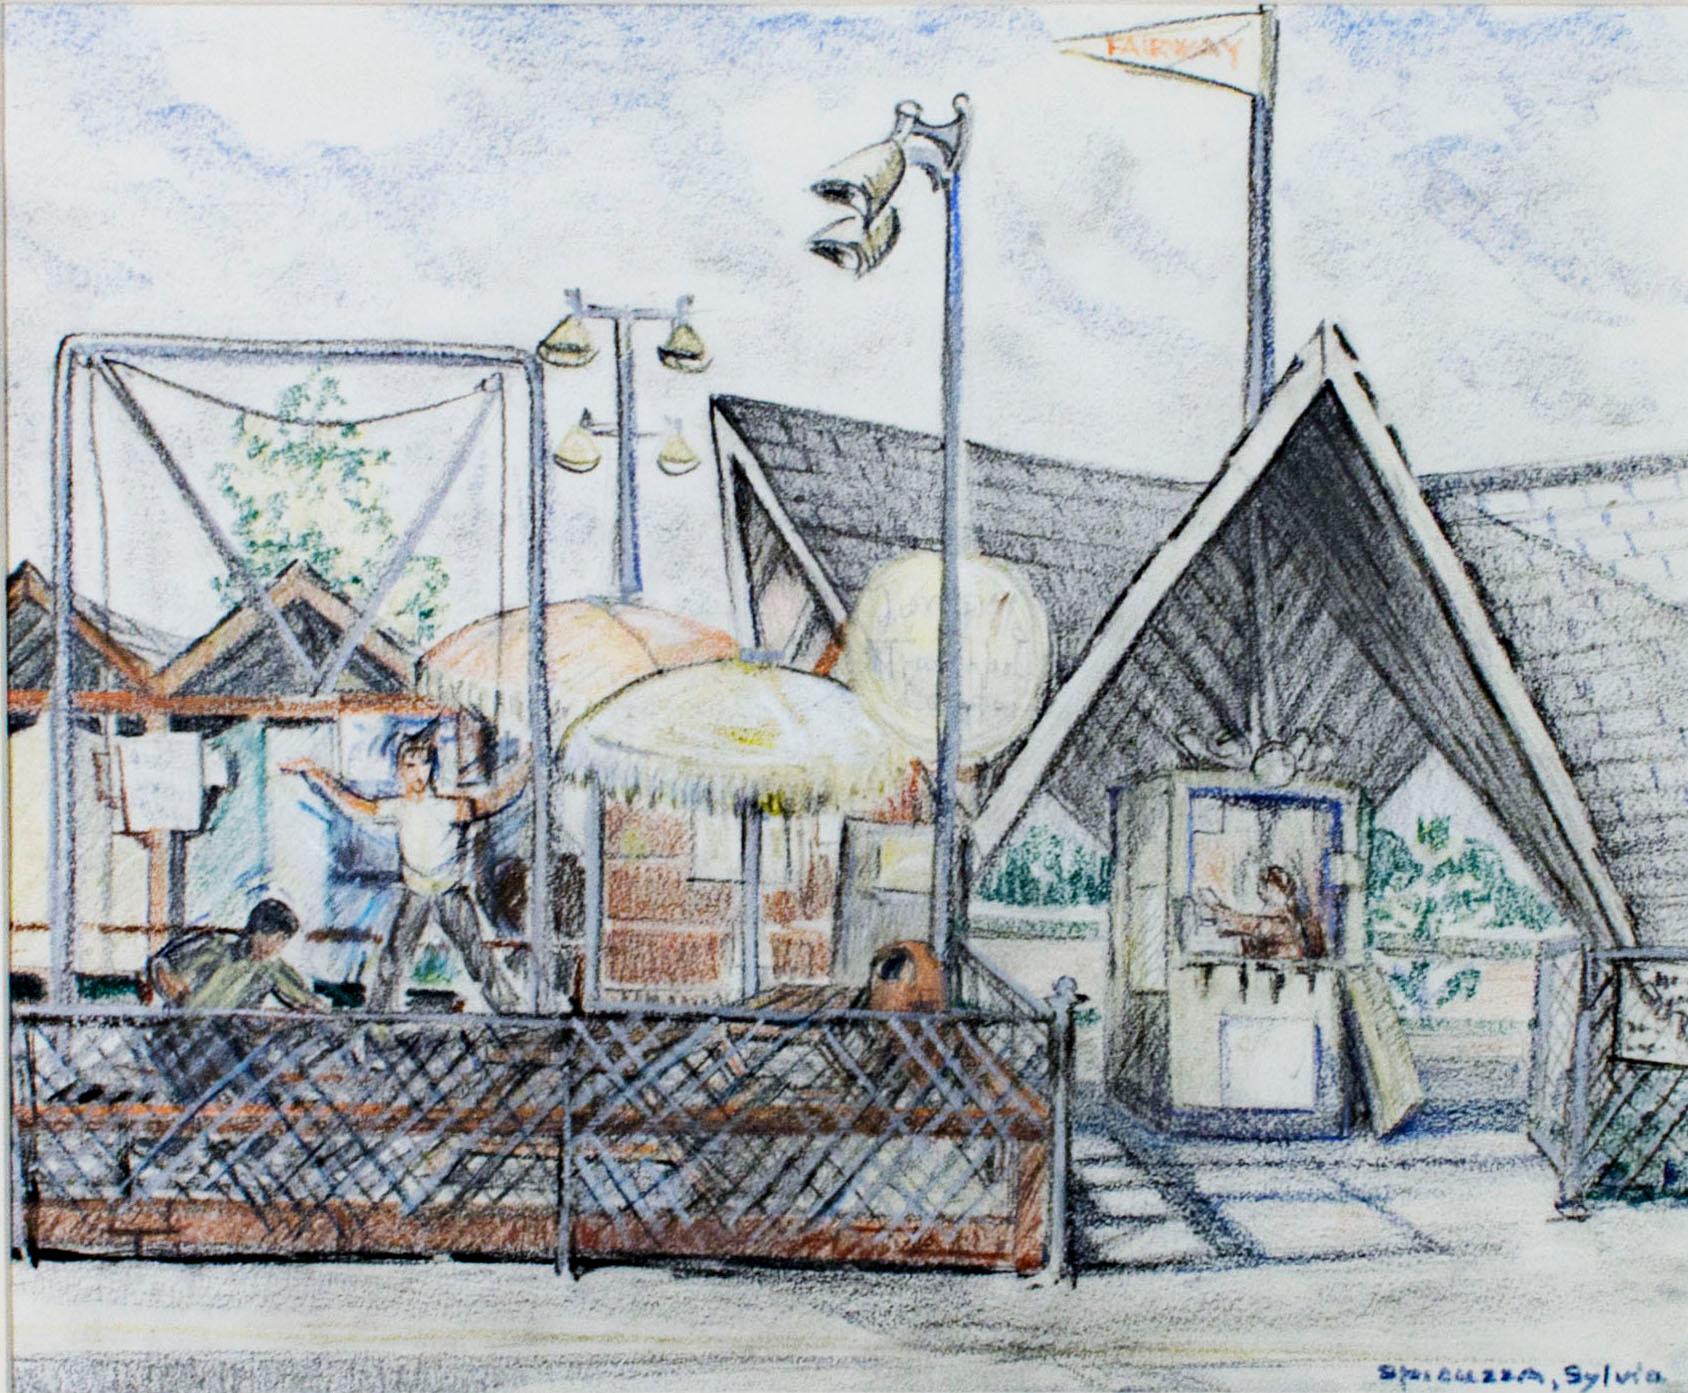 "Trampoline-WI State Fair Park" original signed drawing by Sylvia Spicuzza